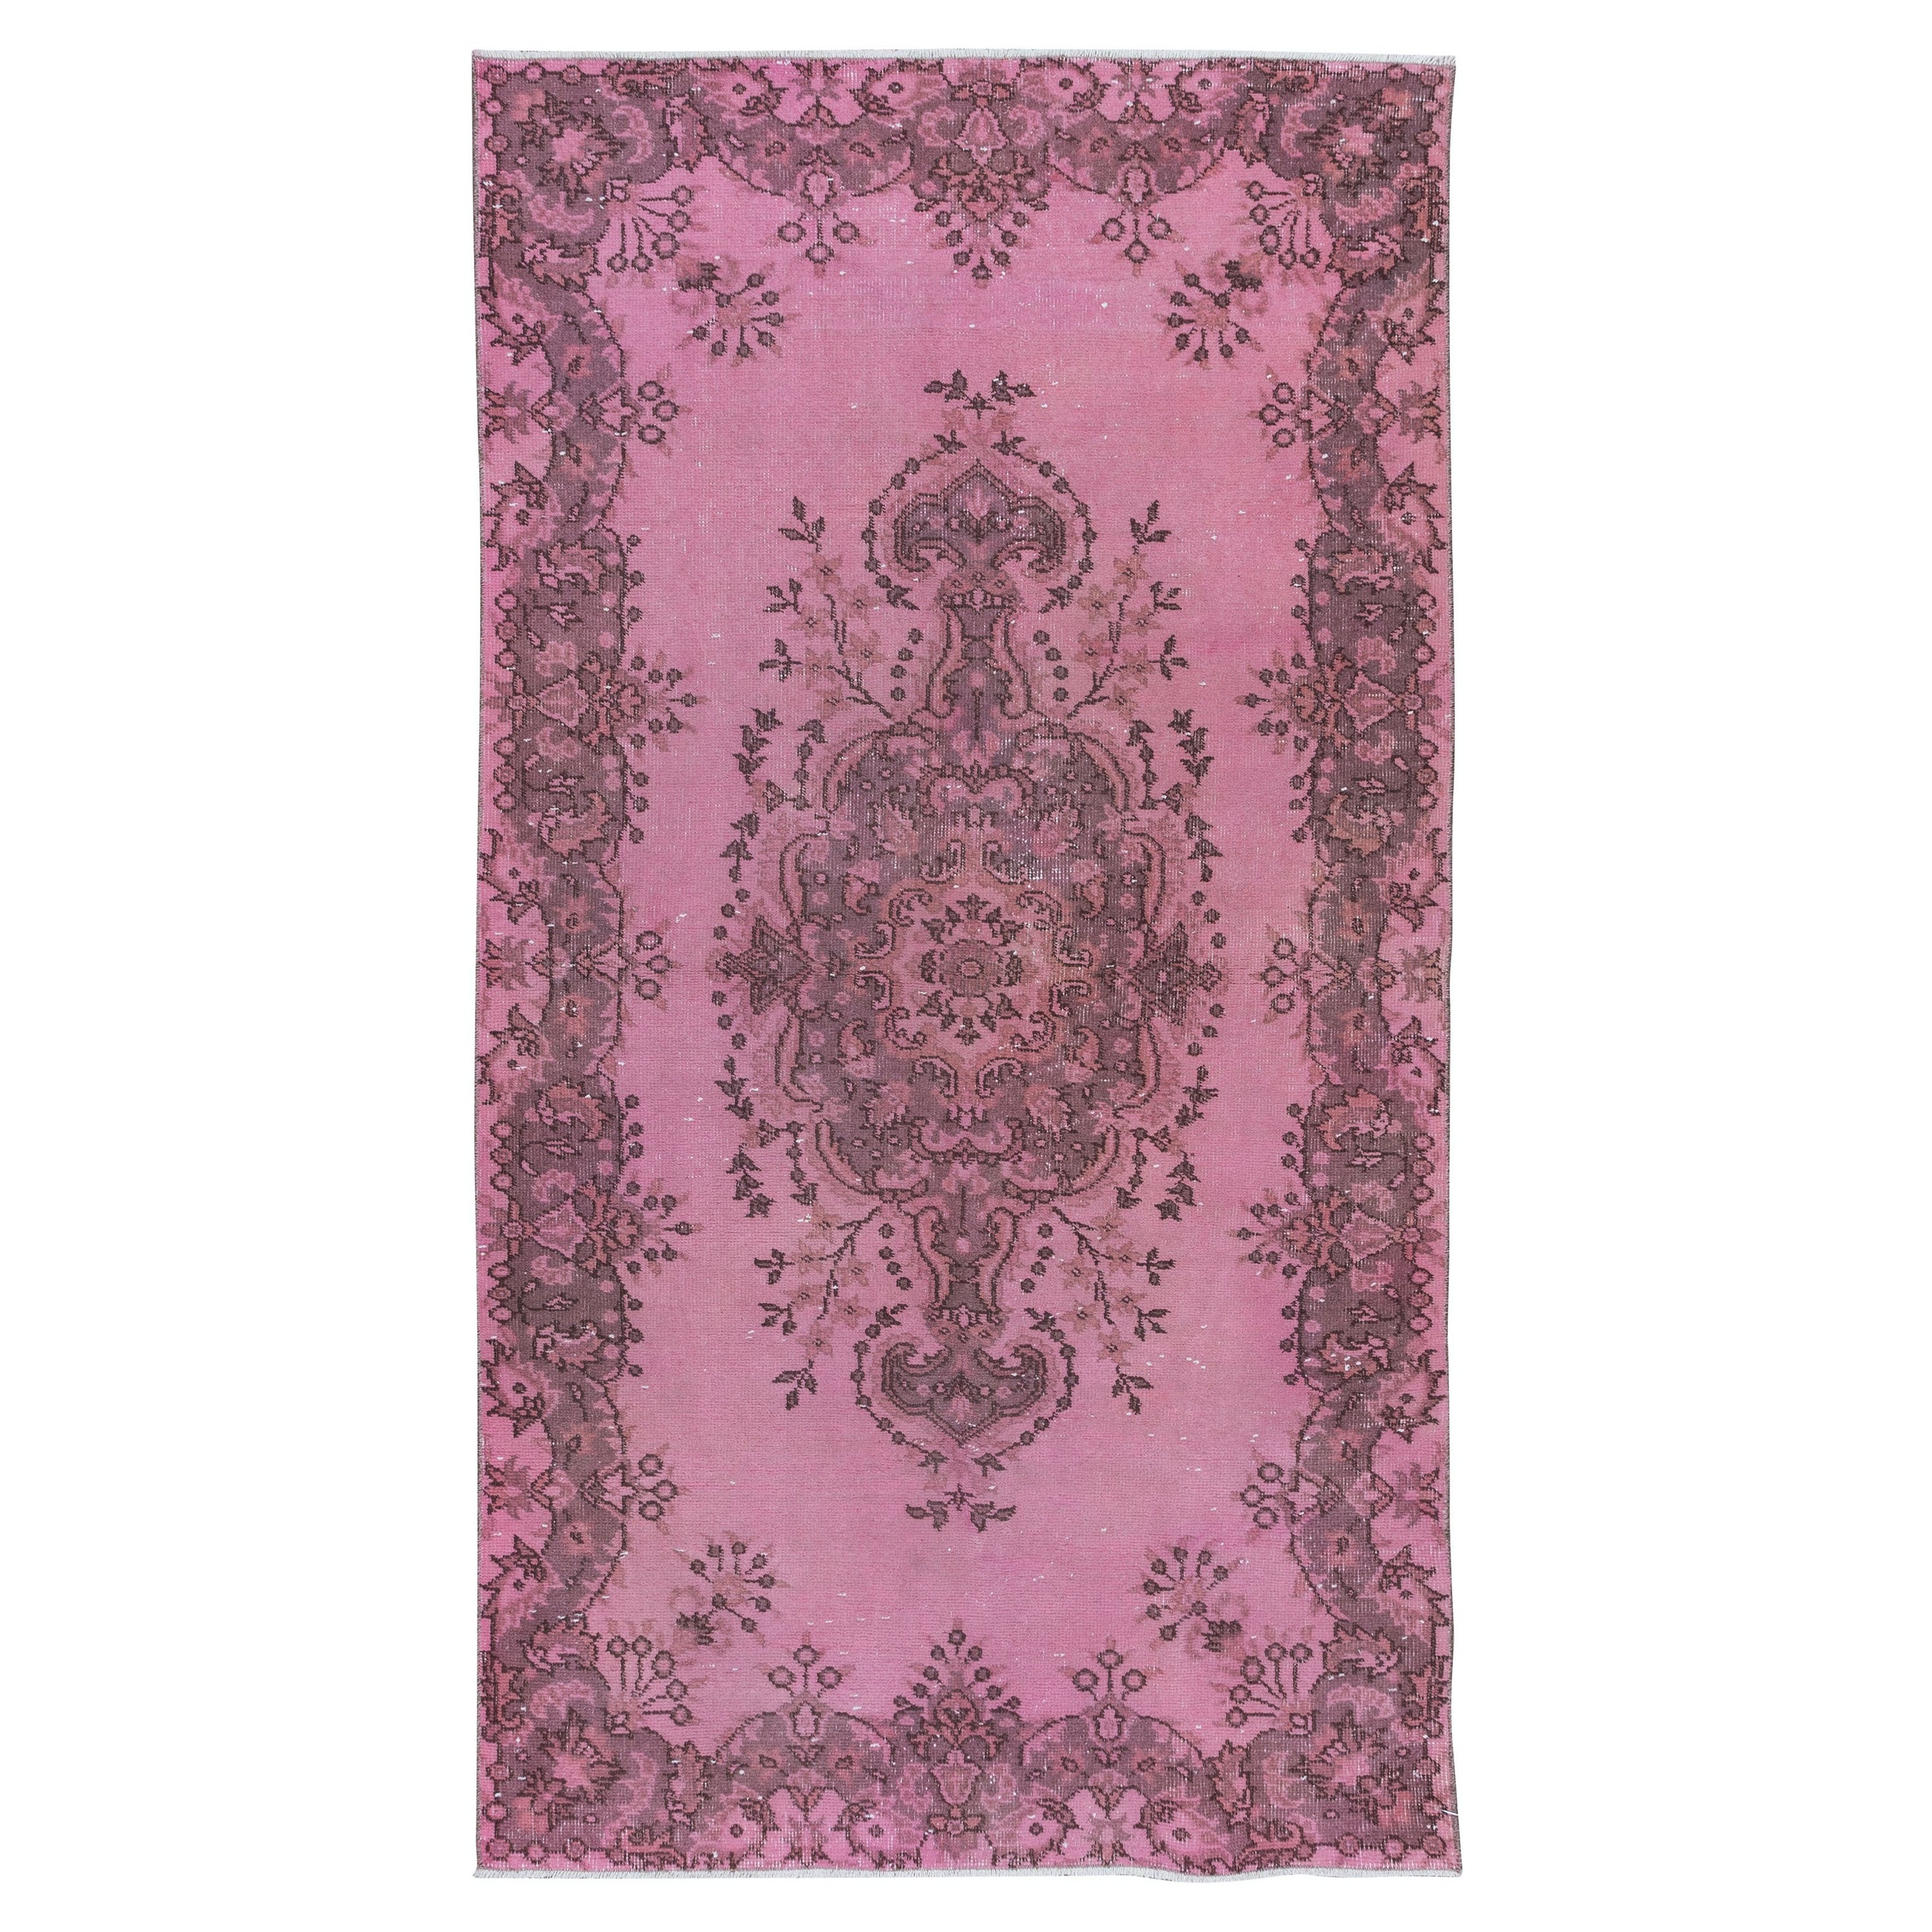 4x7 Ft Handmade Turkish Accent Rug in Pink, Rustic Small Kitchen Rug For Sale